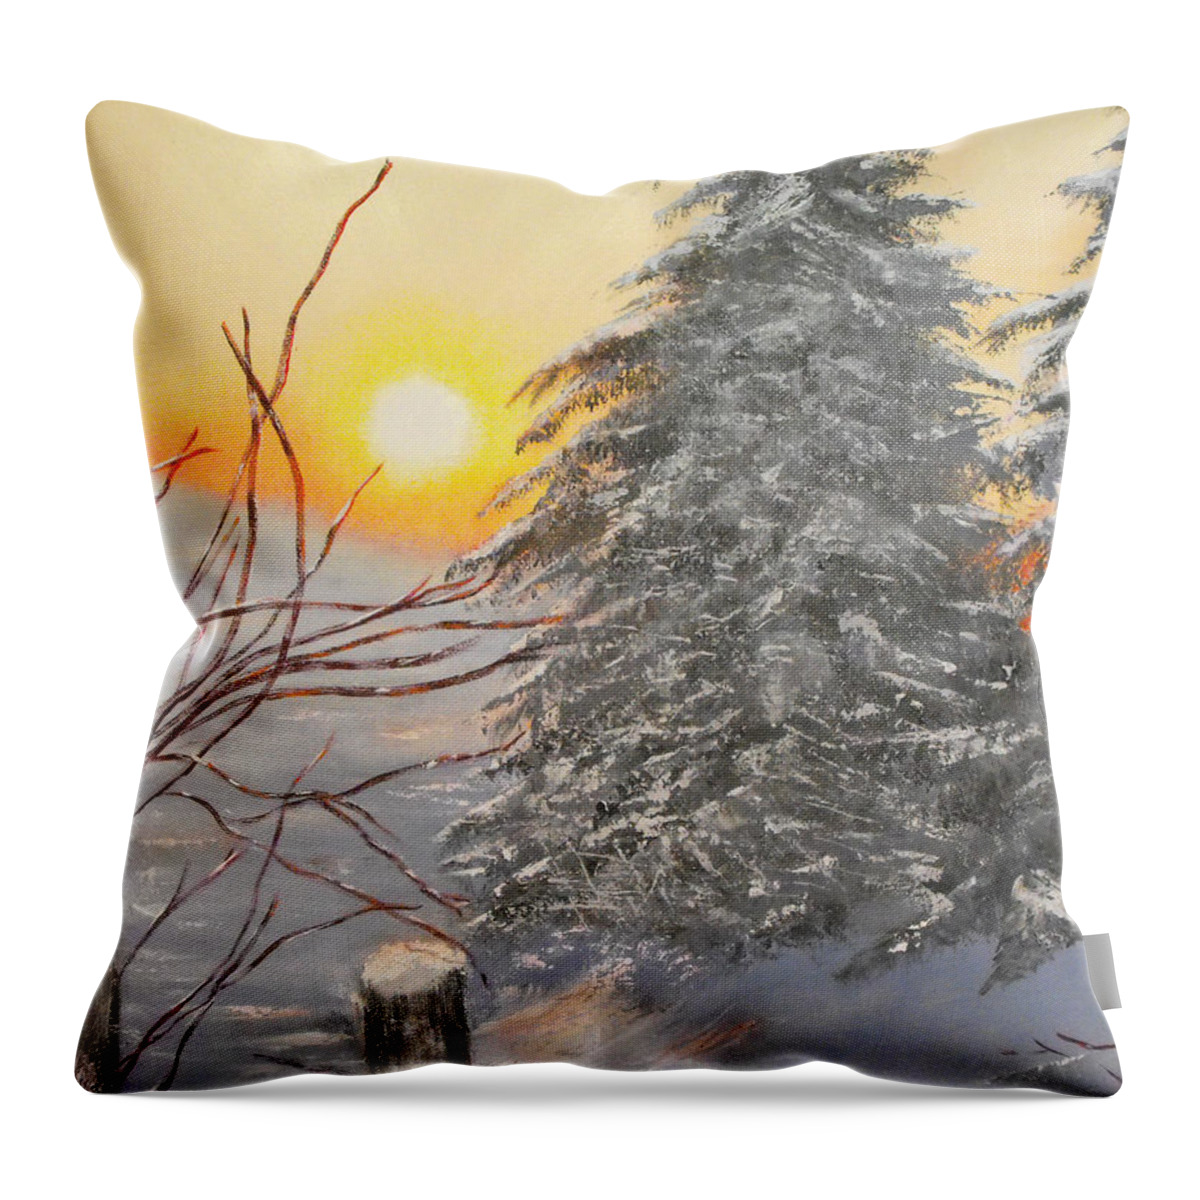 Sunrise Throw Pillow featuring the painting Hope Rising by Susan Bruner